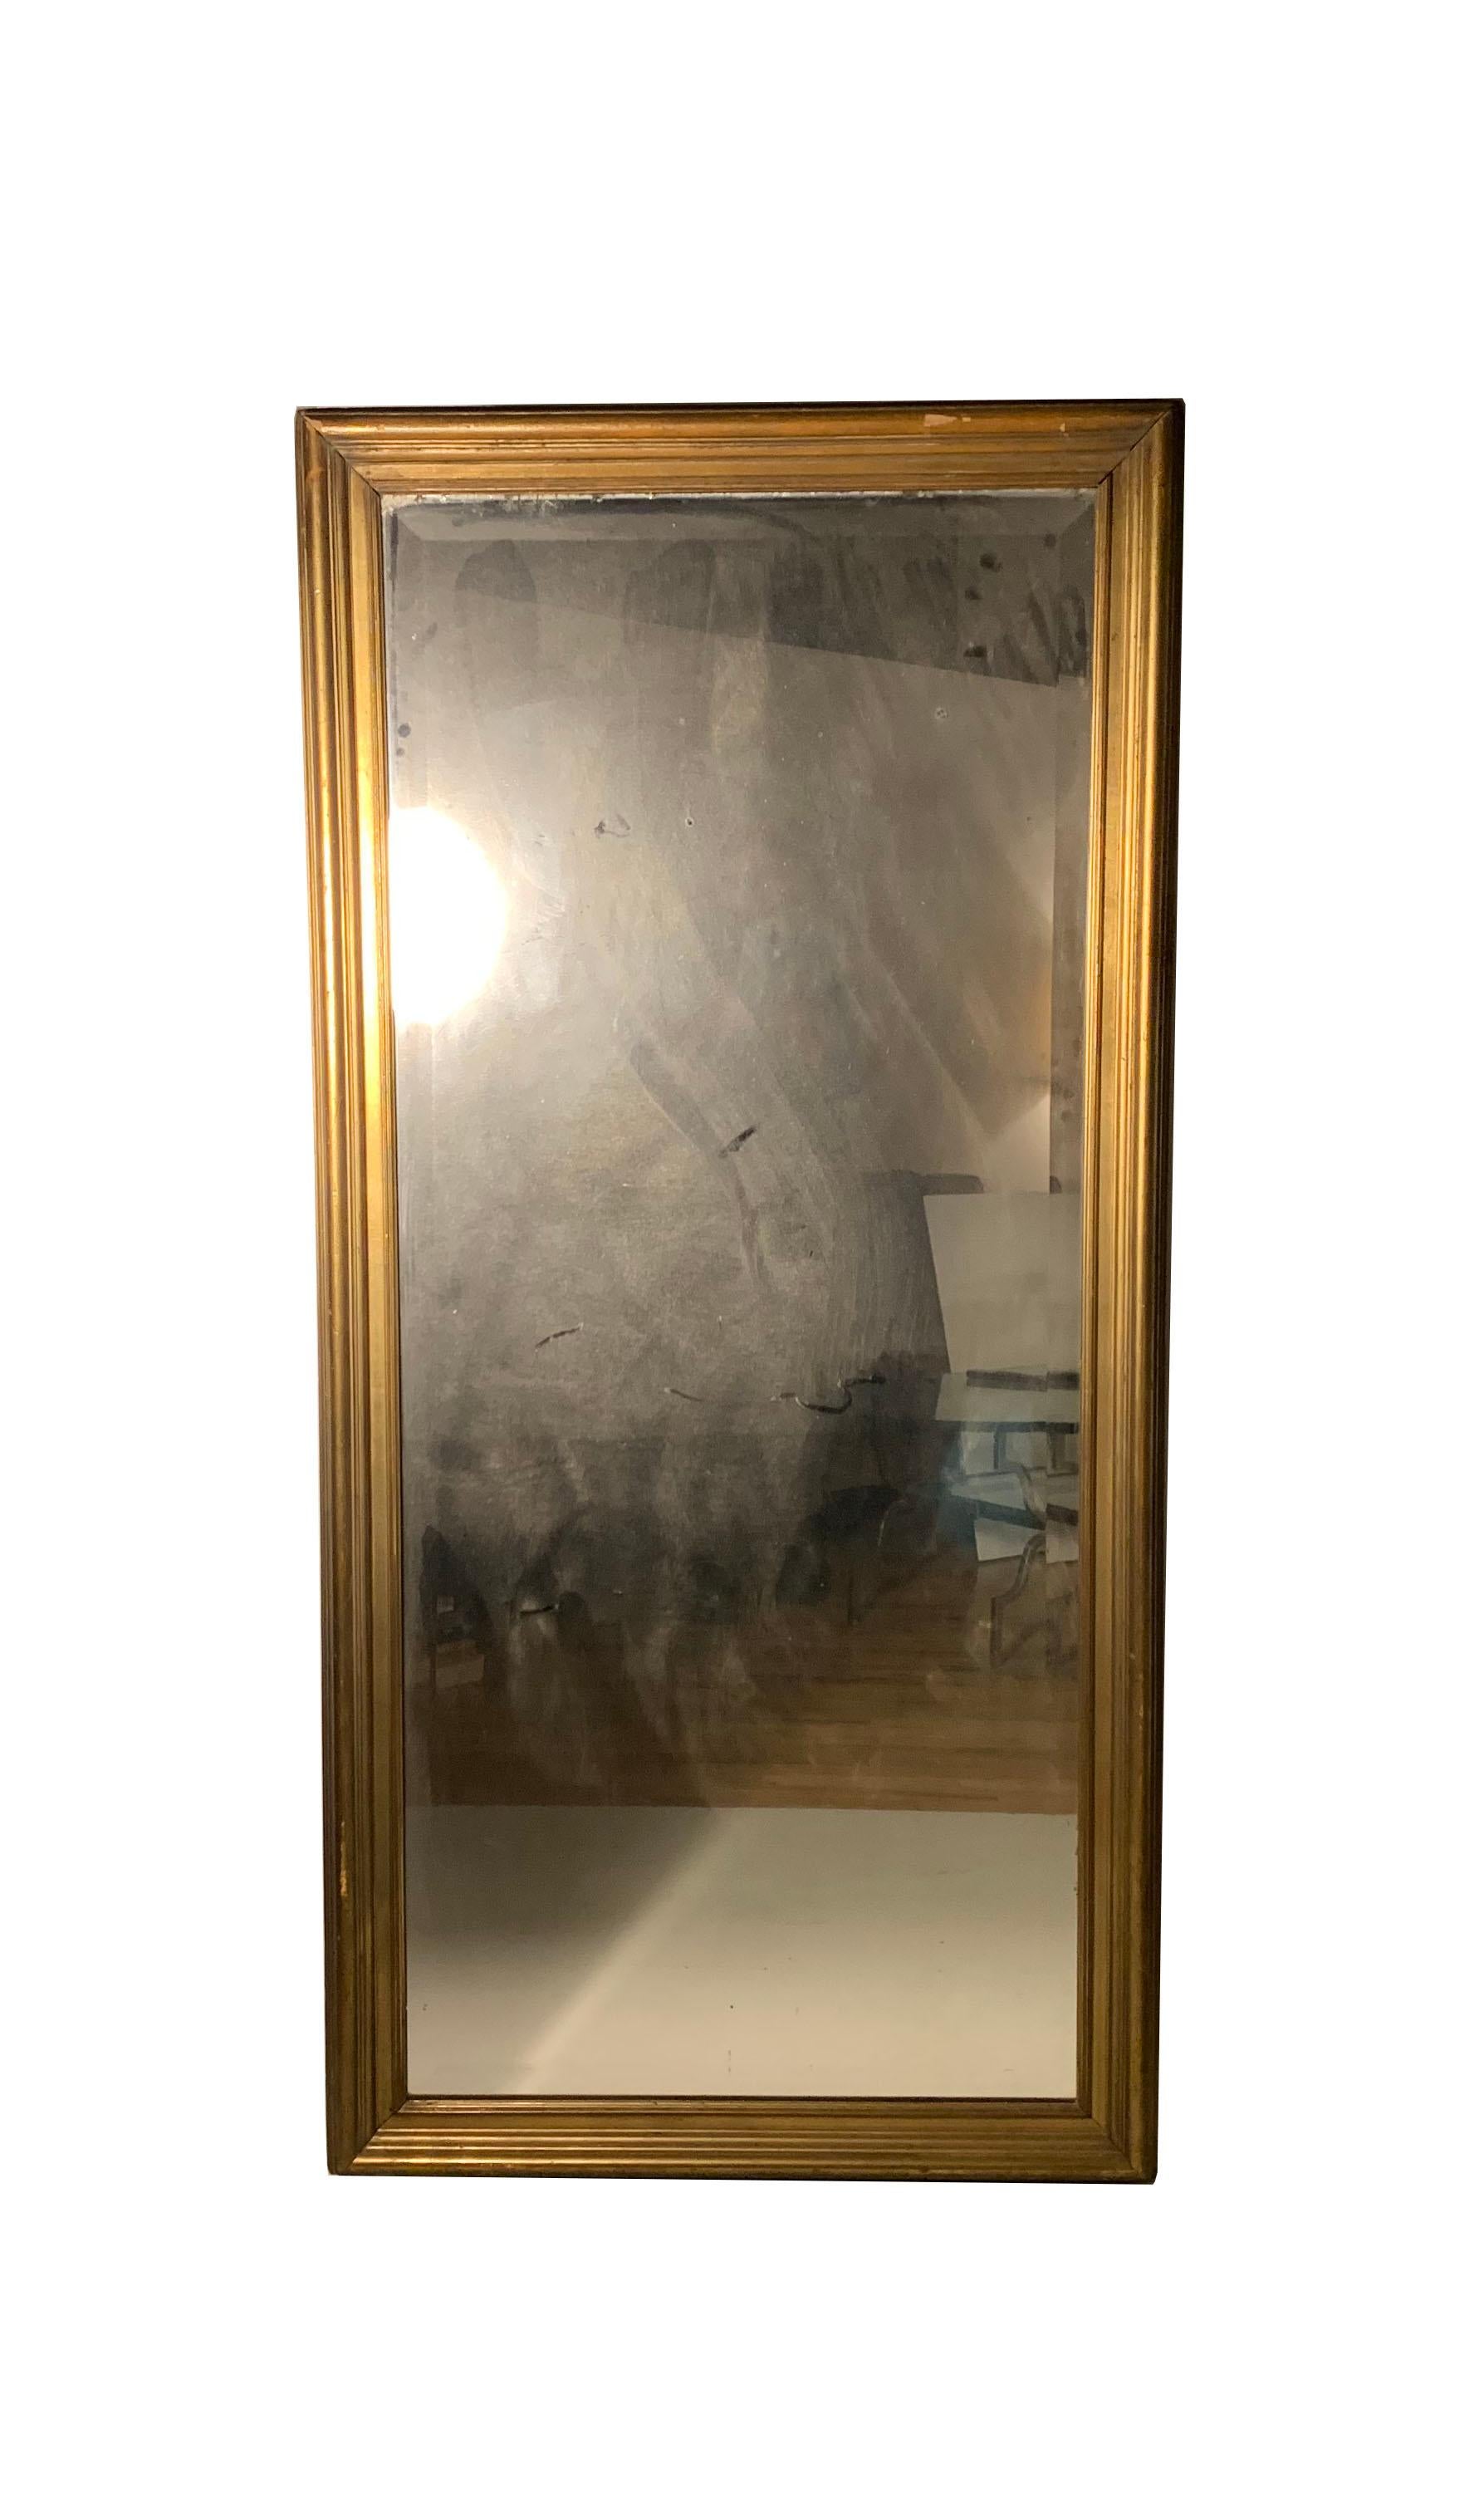 Large Gilt Antique Frame or Mirror.

As found. Appears to be of good age. Early 20th century. A Gilding overall.  

Mirror shows signs of age as does the wood frame. Gray pieces on back were added later for stability it appears. 